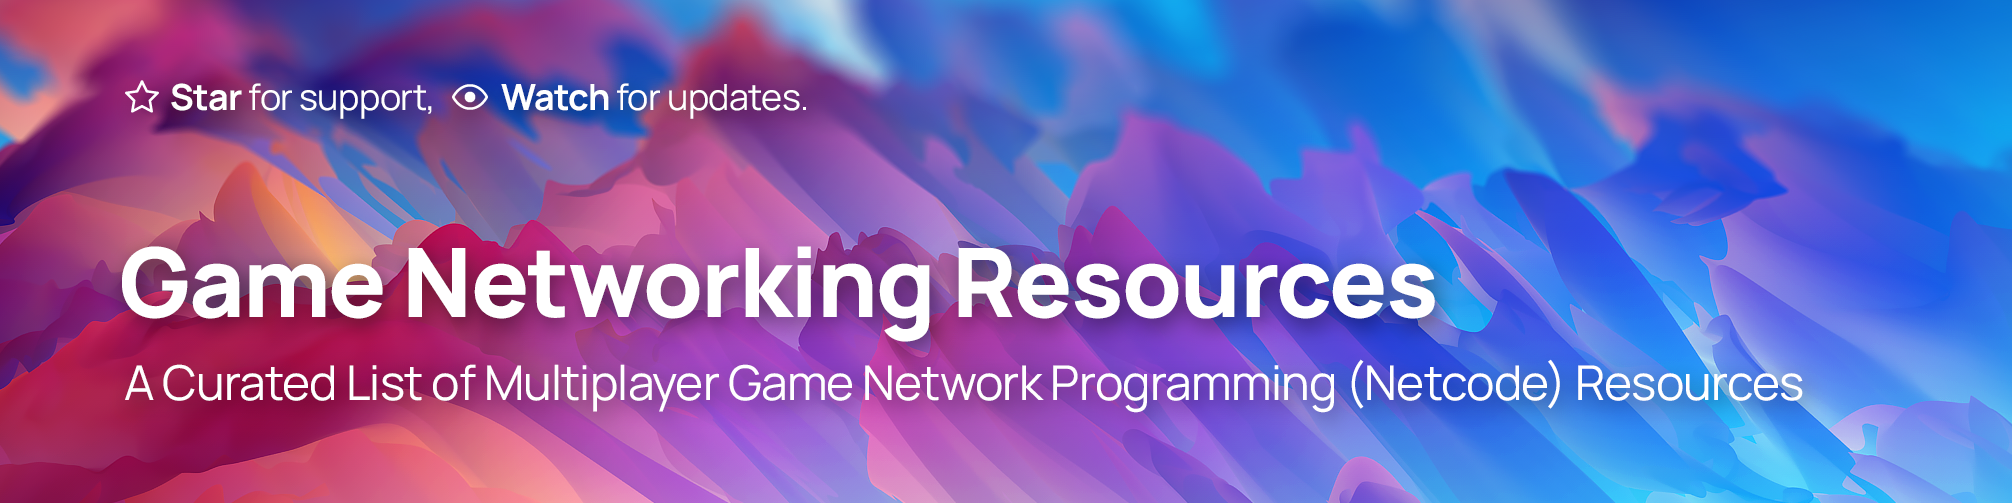 Game Networking Resources